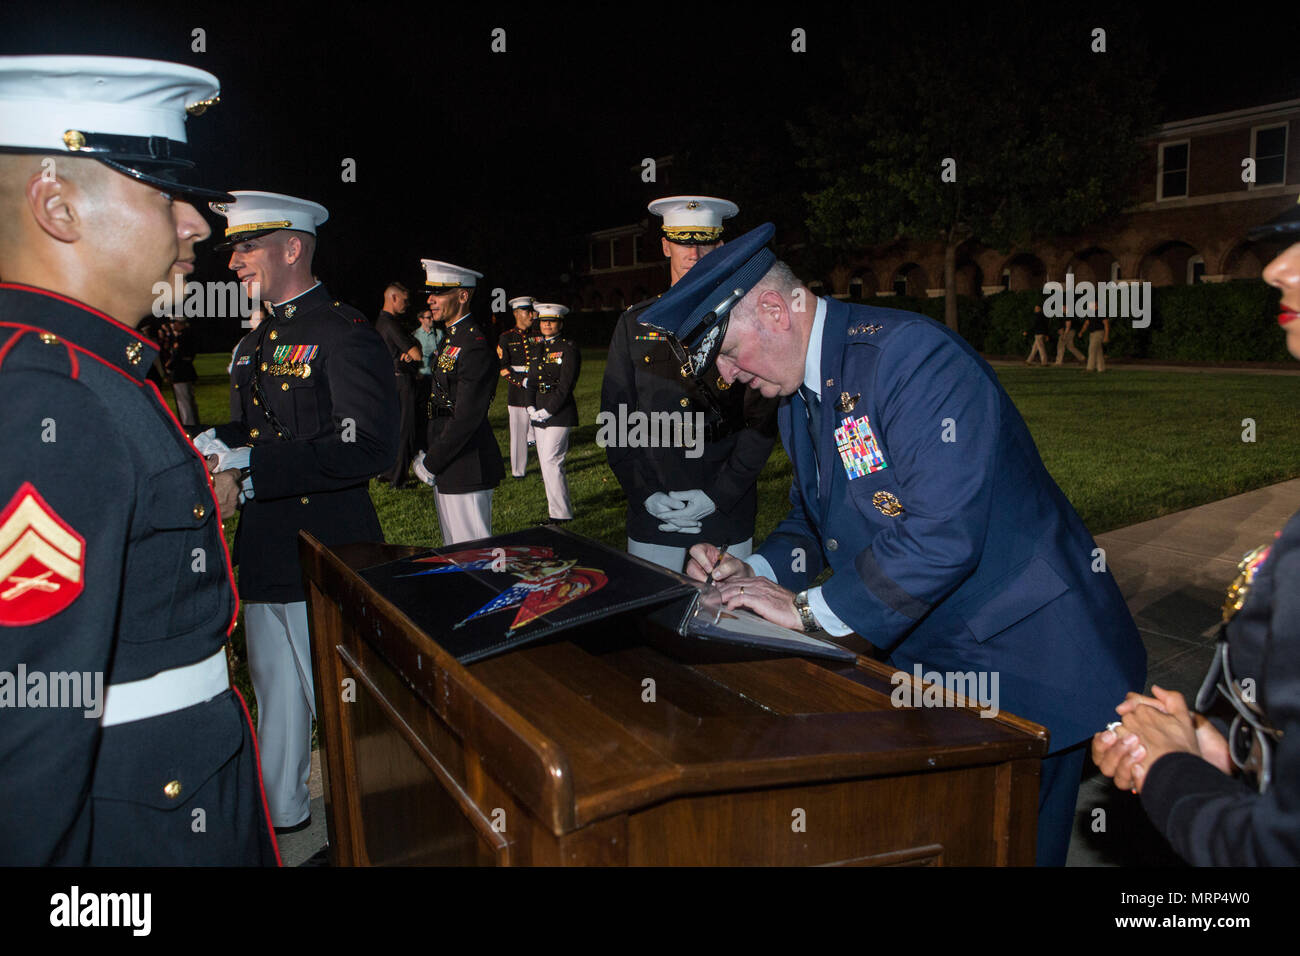 U.S. Air Force Lt. Gen. Thomas J. Trask, vice commander of Headquarters U.S. Special Operations Command (SOCOM), signs a guest book after an evening parade at Marine Barracks Washington, Washington, D.C., June 23, 2017. Evening parades are held as a means of honoring senior officials, distinguished citizens and supporters of the Marine Corps. (U.S. Marine Corps photo by Lance Cpl. Stephon L. McRae) Stock Photo